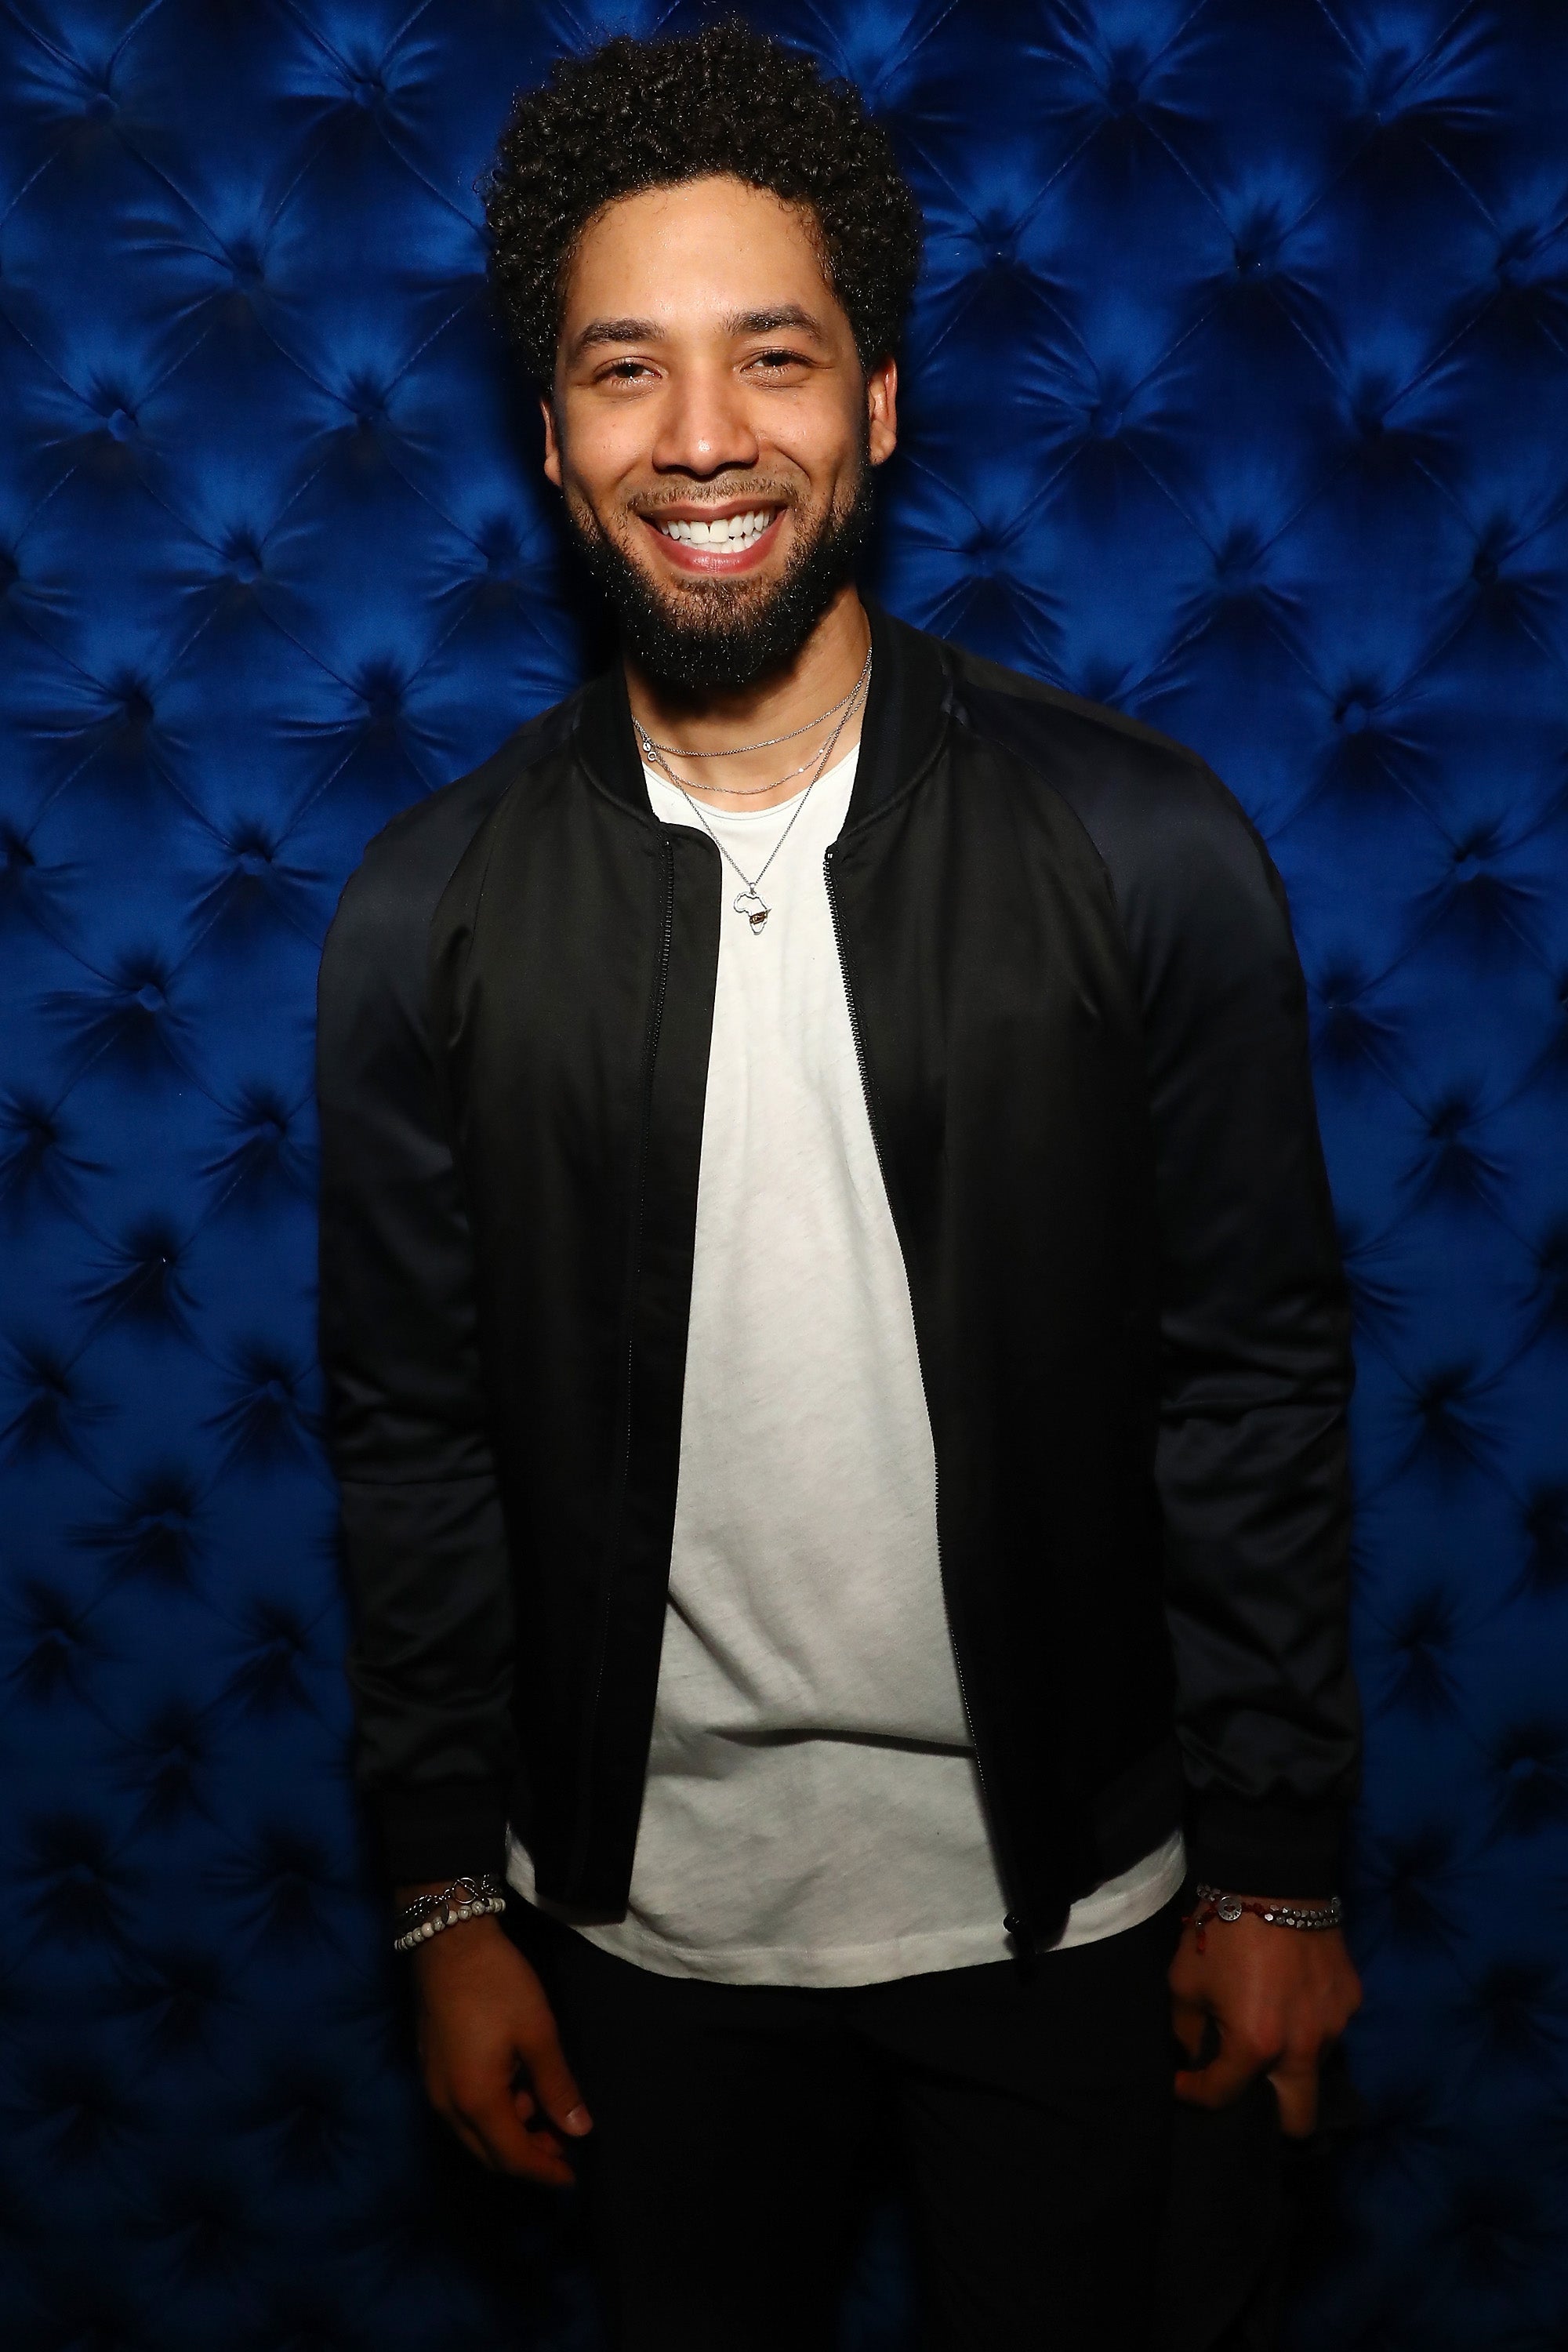 ‘Sum of My Music:’ Jussie Smollett Gives Us A Track-By-Track Deep Dive Into His Debut Album